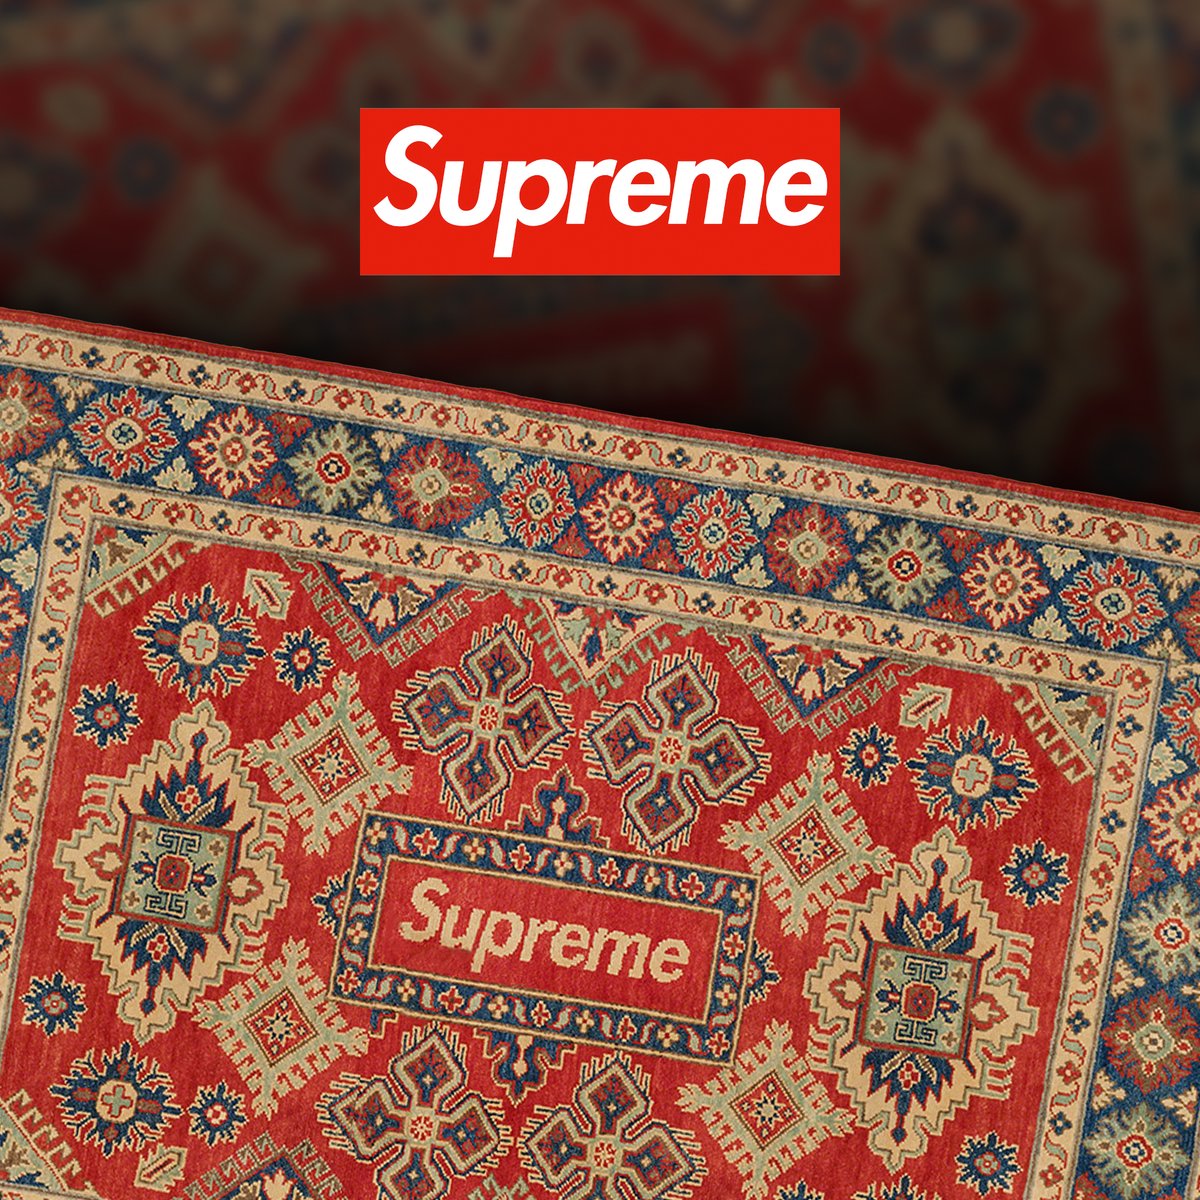 Supreme Drops on X: Supreme Woven Area Rug is also releasing this